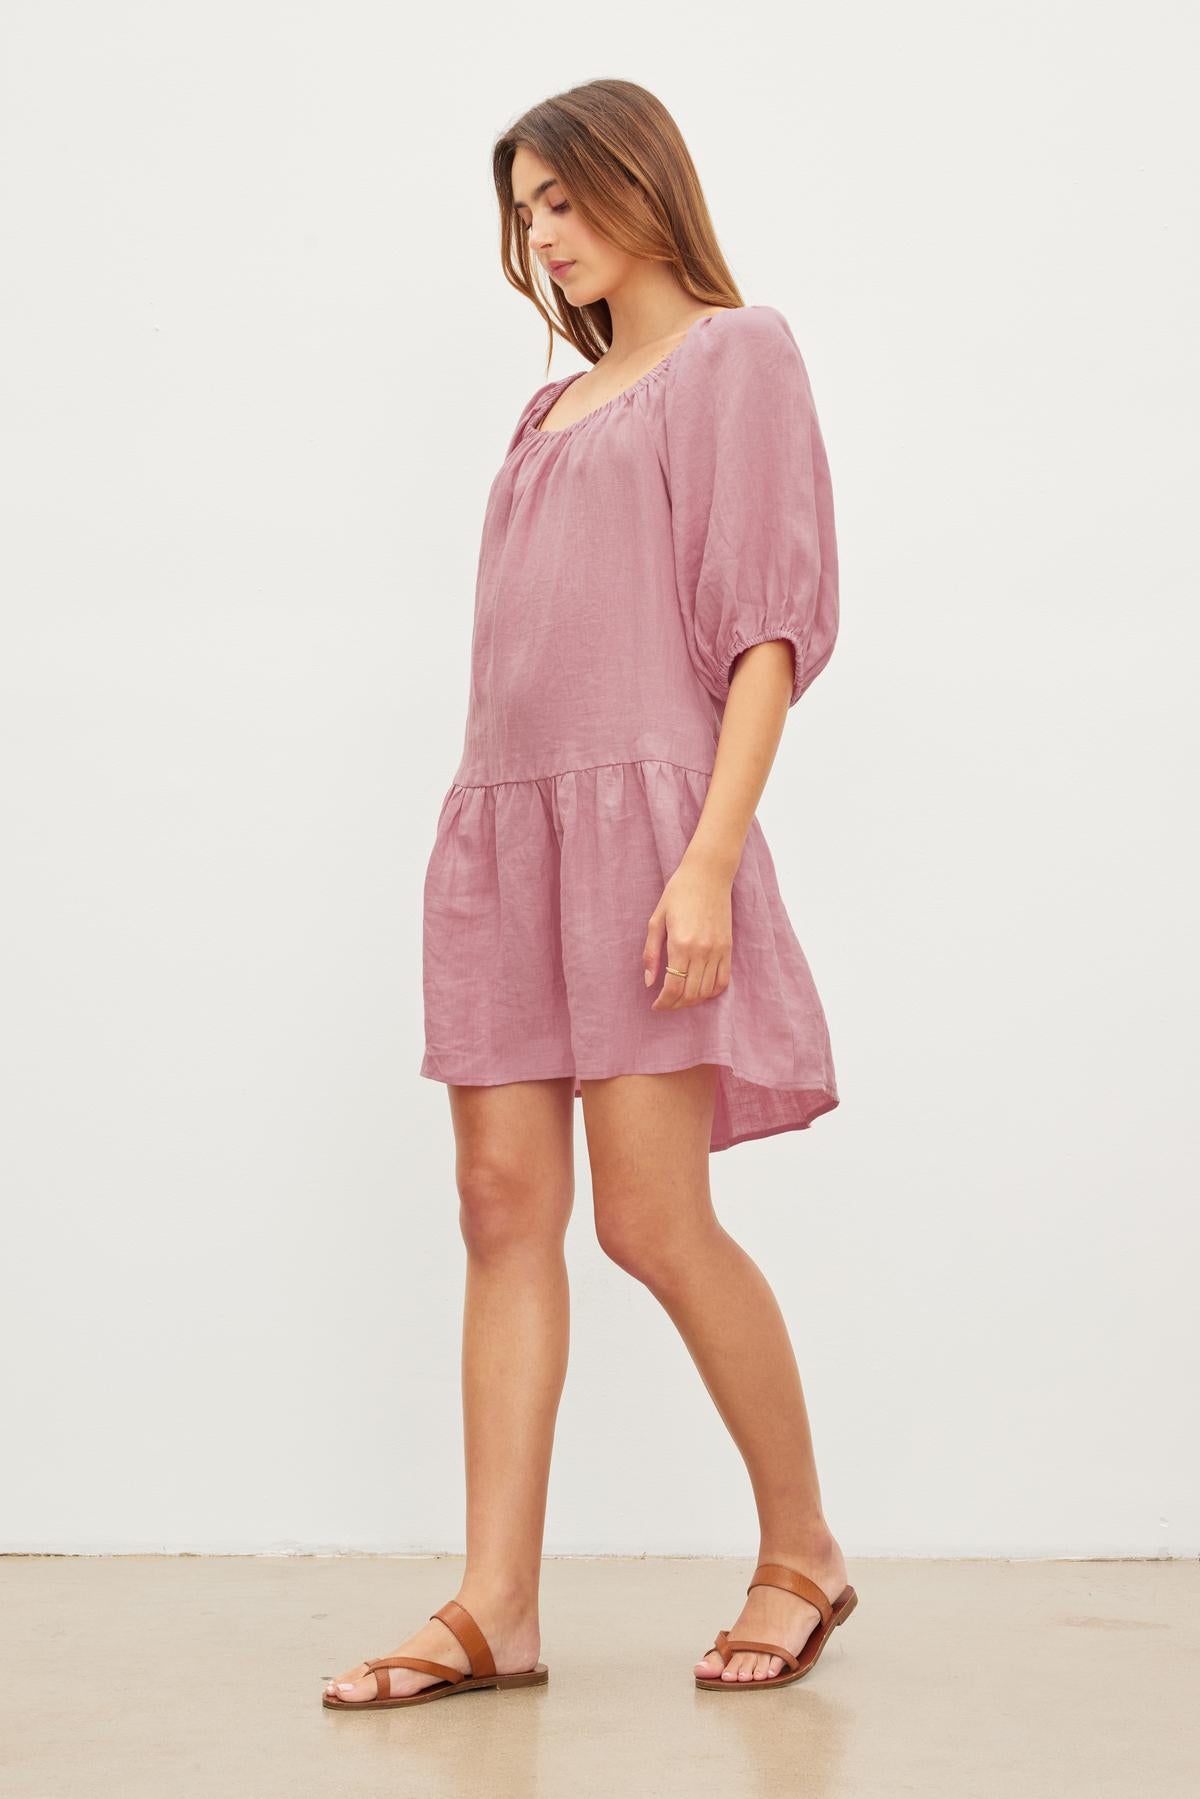 A woman in a pink Velvet by Graham & Spencer IRINA LINEN TIERED DRESS and brown sandals standing with her head tilted down, against a plain white background.-36571205402817